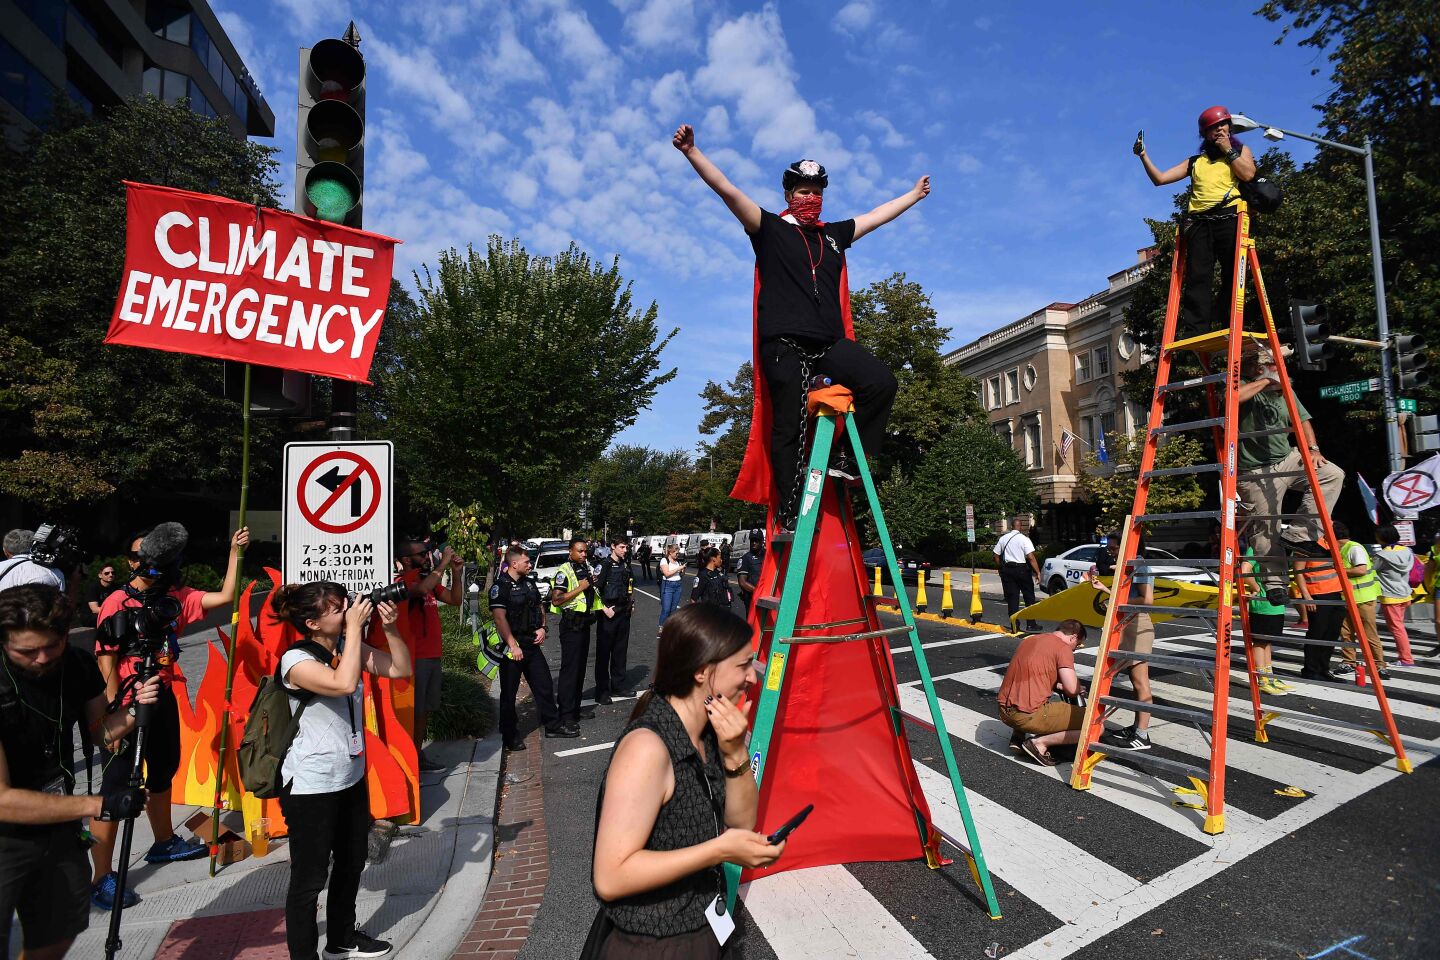 Global climate action week protest in Washington, D.C.